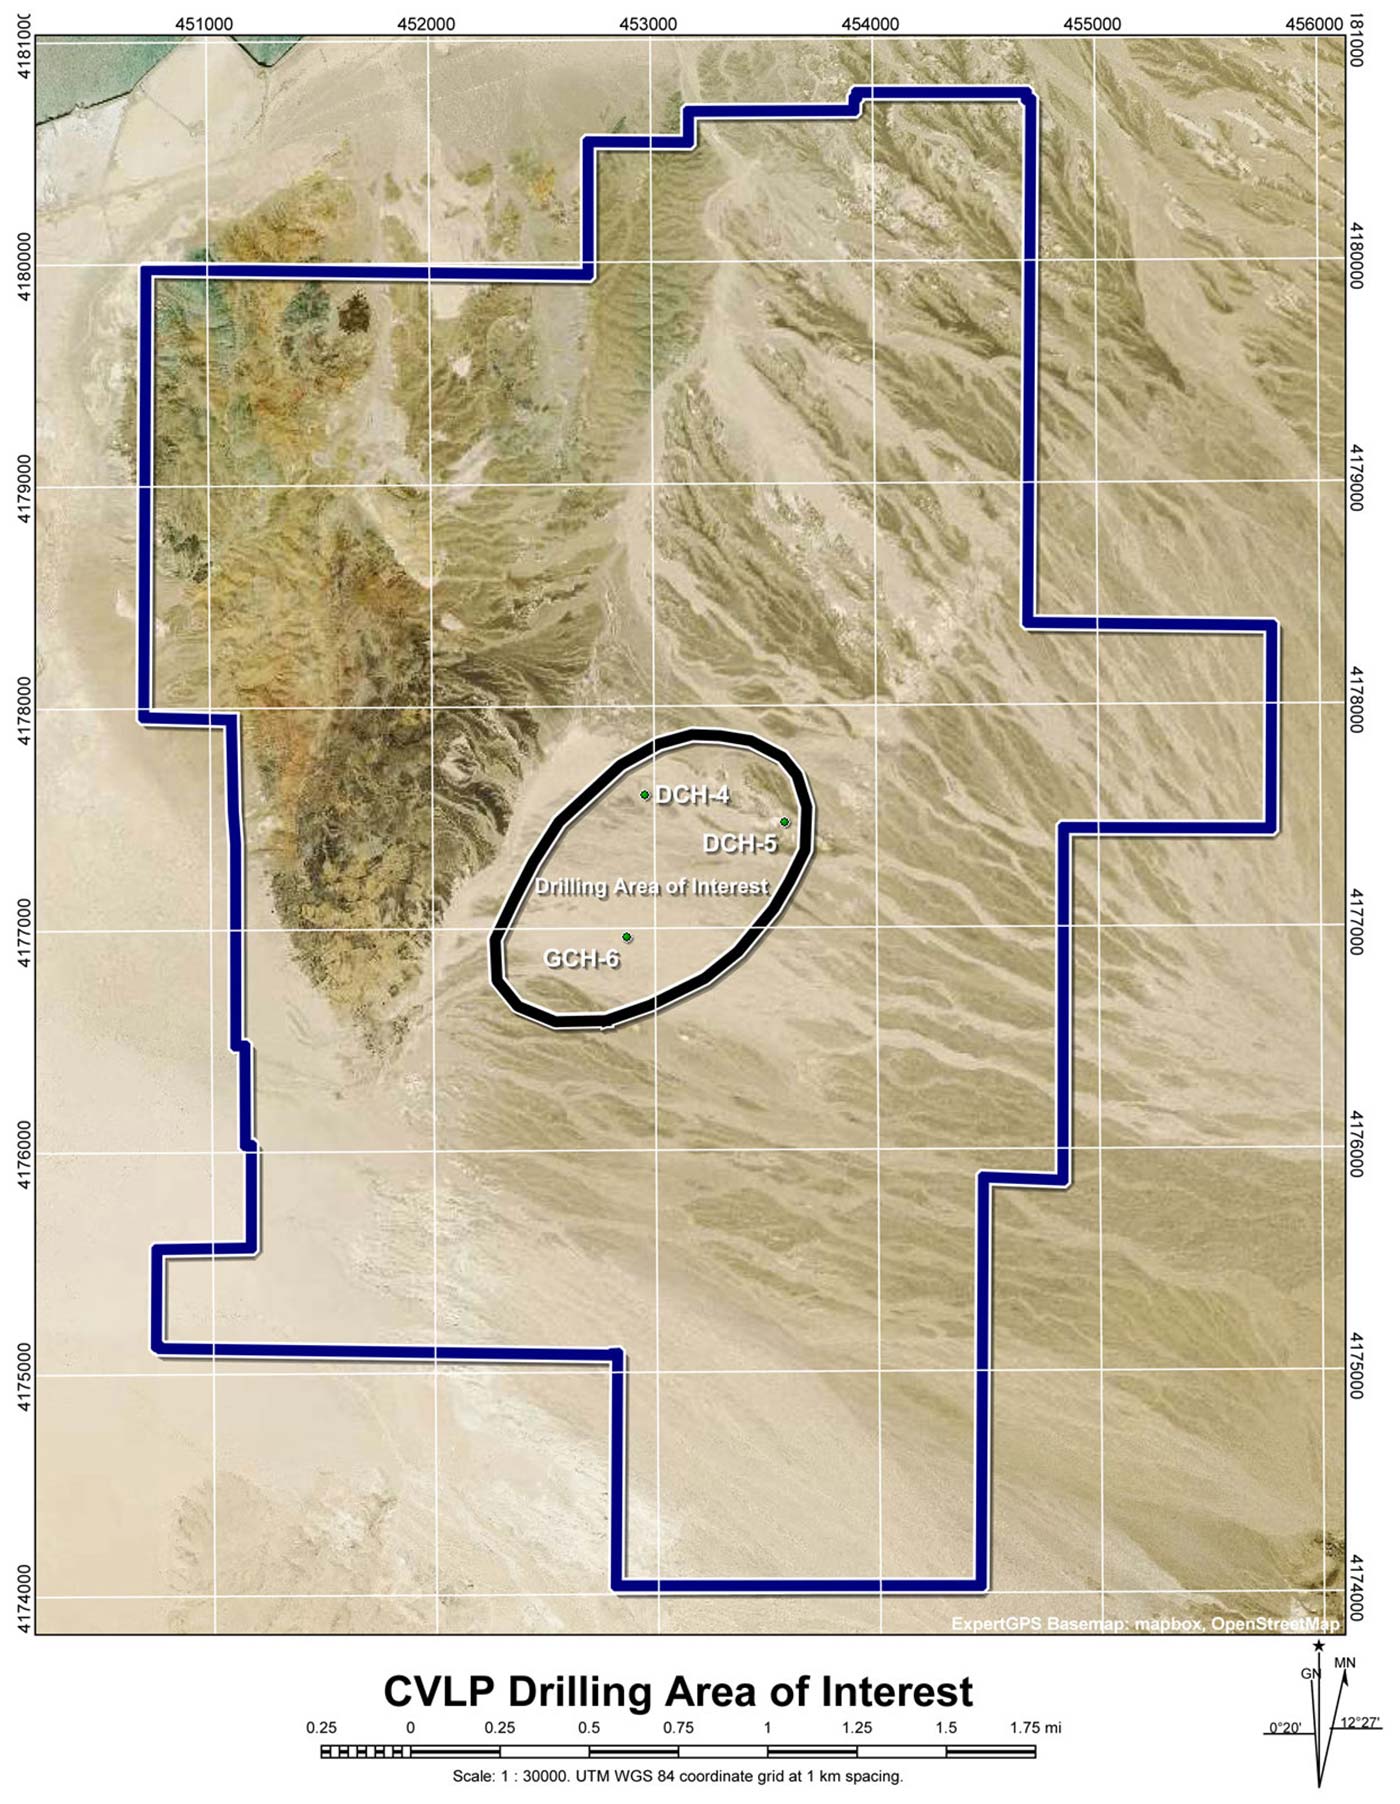 cyp_clayton_valley_drilling_map_2019